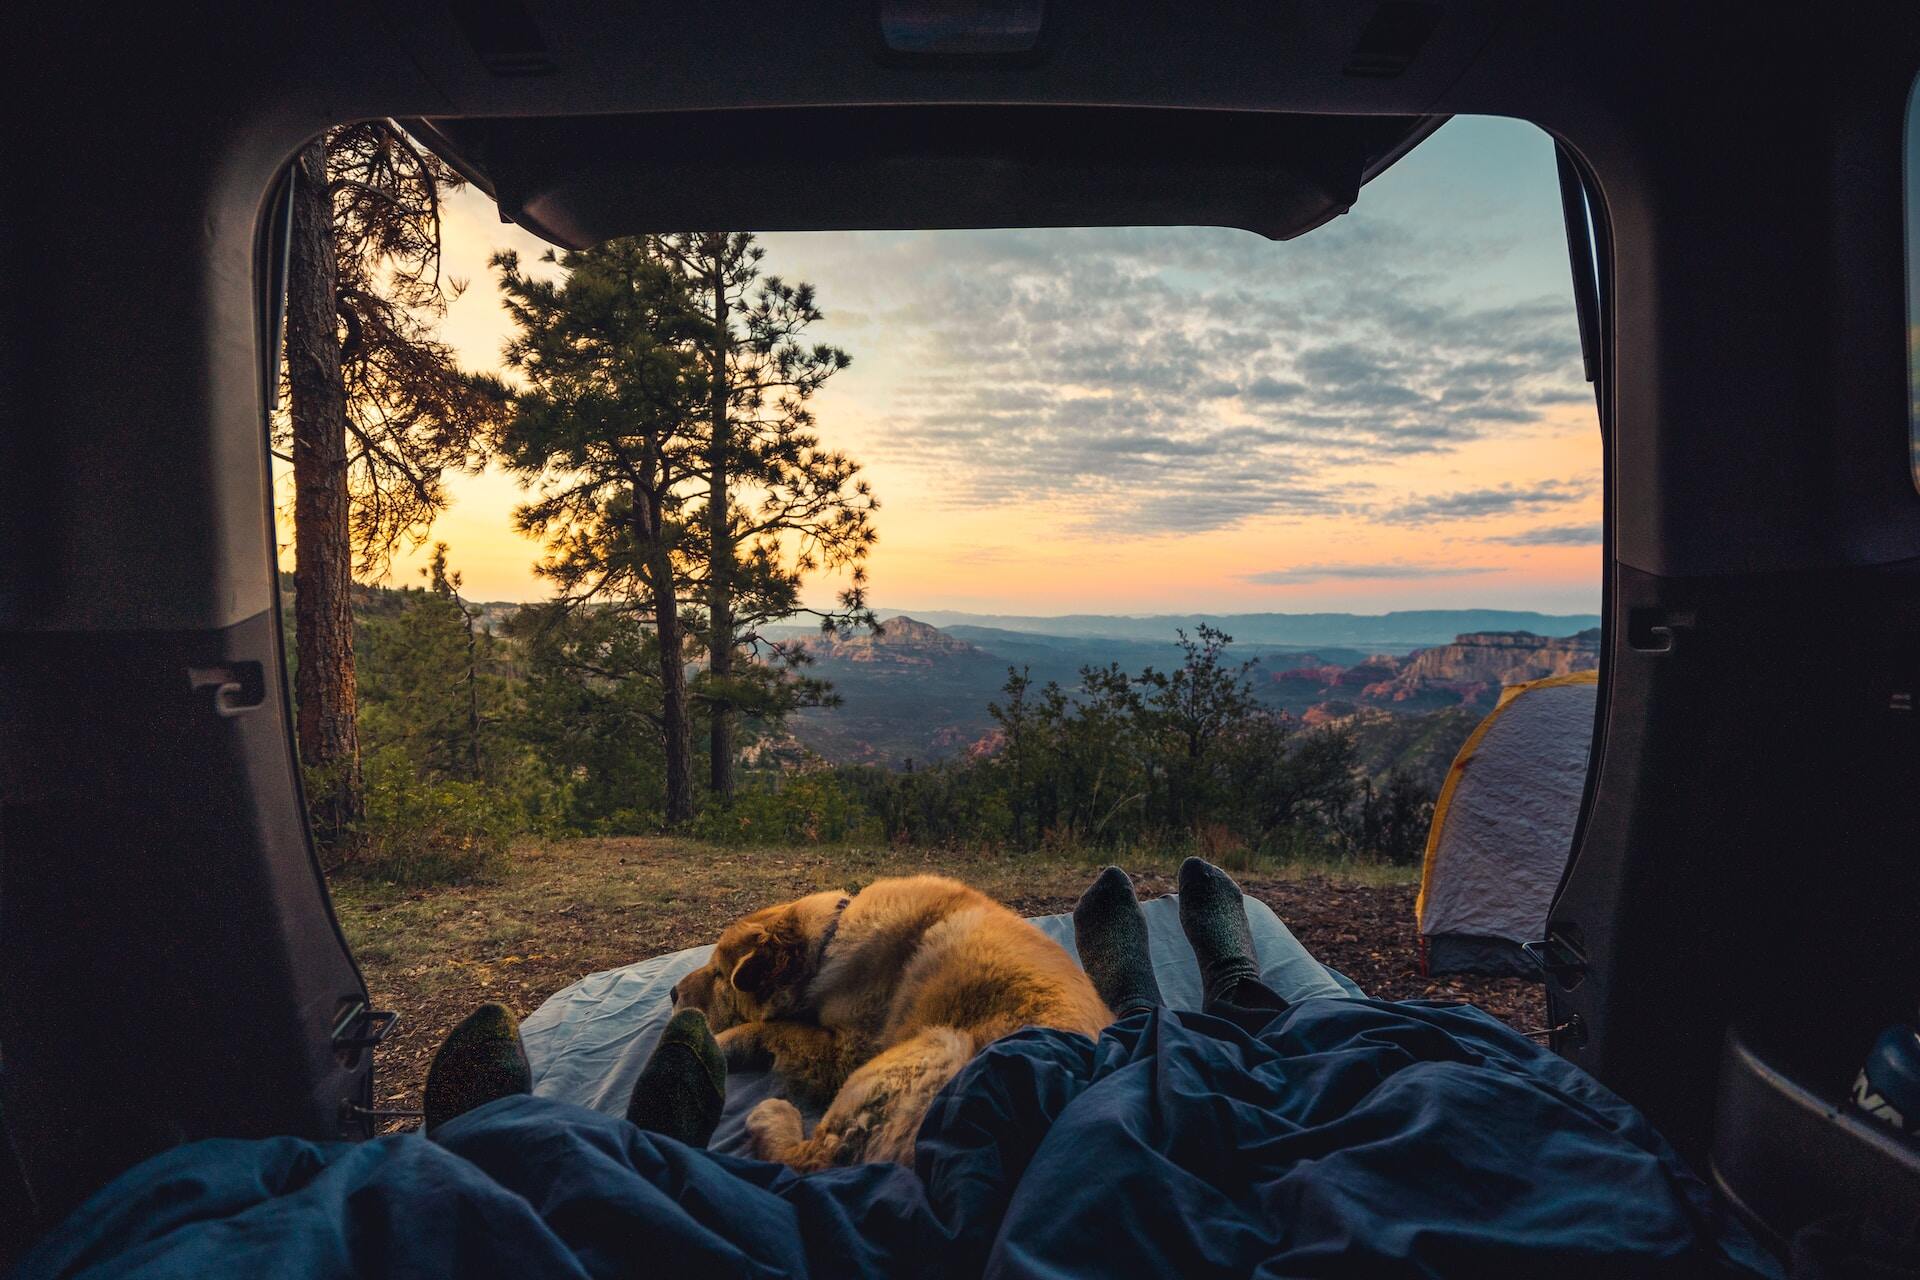 A dog sleeping outside of a tent overlooking a mountain landscape